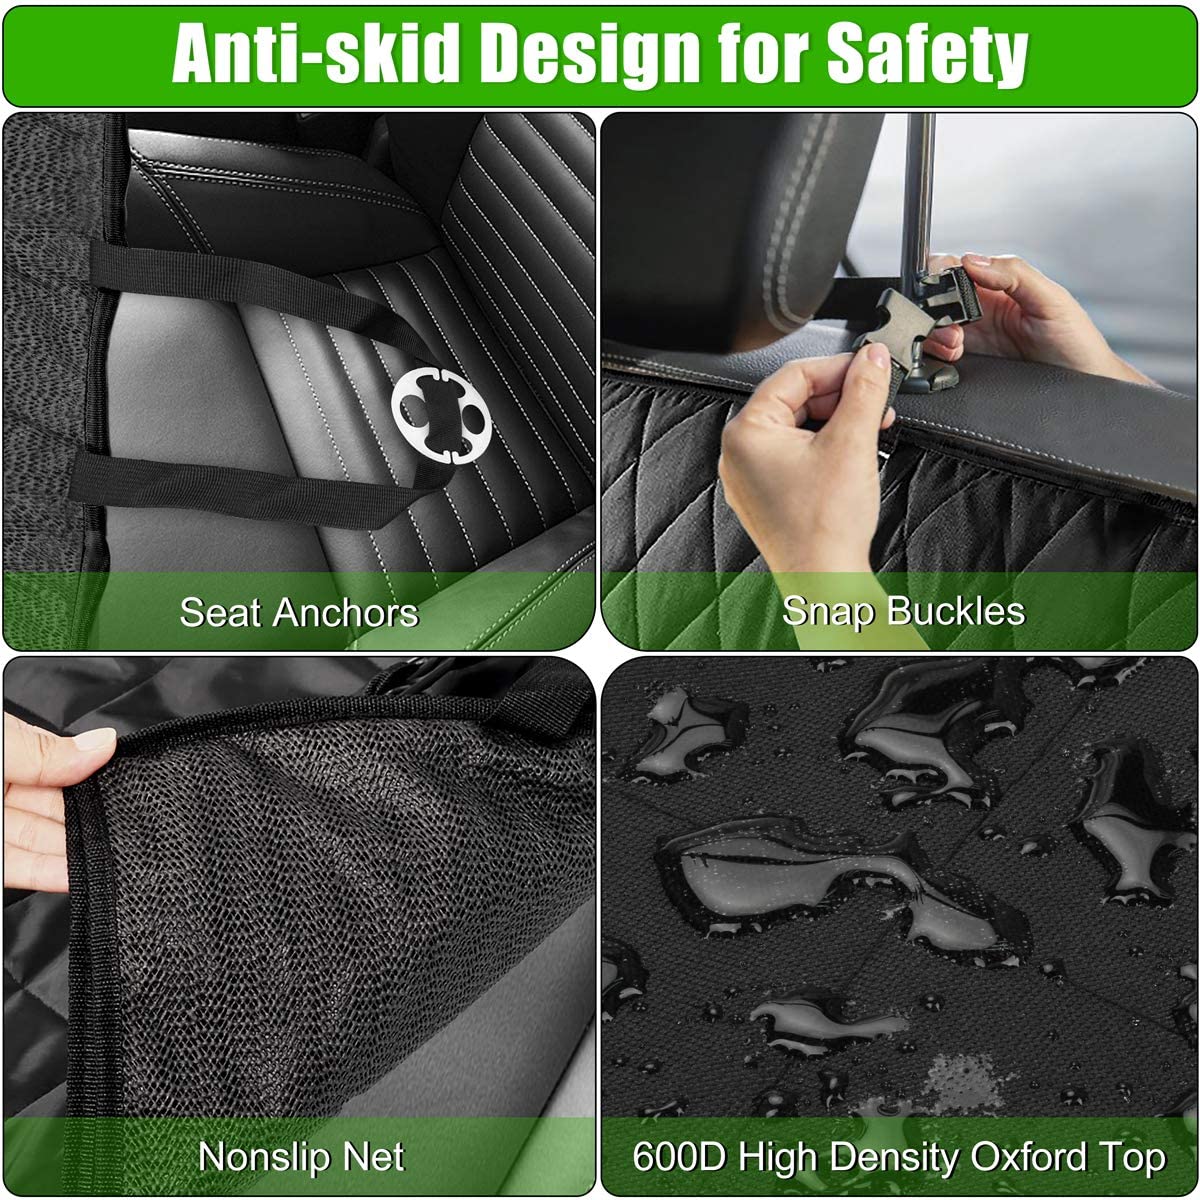 Waterproof Pet Car Seat Cover Car Seat Protection for Pets Easy-Clean Pet Car Accessories Adventure-Ready Pet Travel Gear Thoughtful Pet Owner Gift Happy and Safe Pet Travel Pet-Friendly Car Protection Durable Car Seat Cover Premium Quality Pet Accessories Show Your Love with Pet Accessories